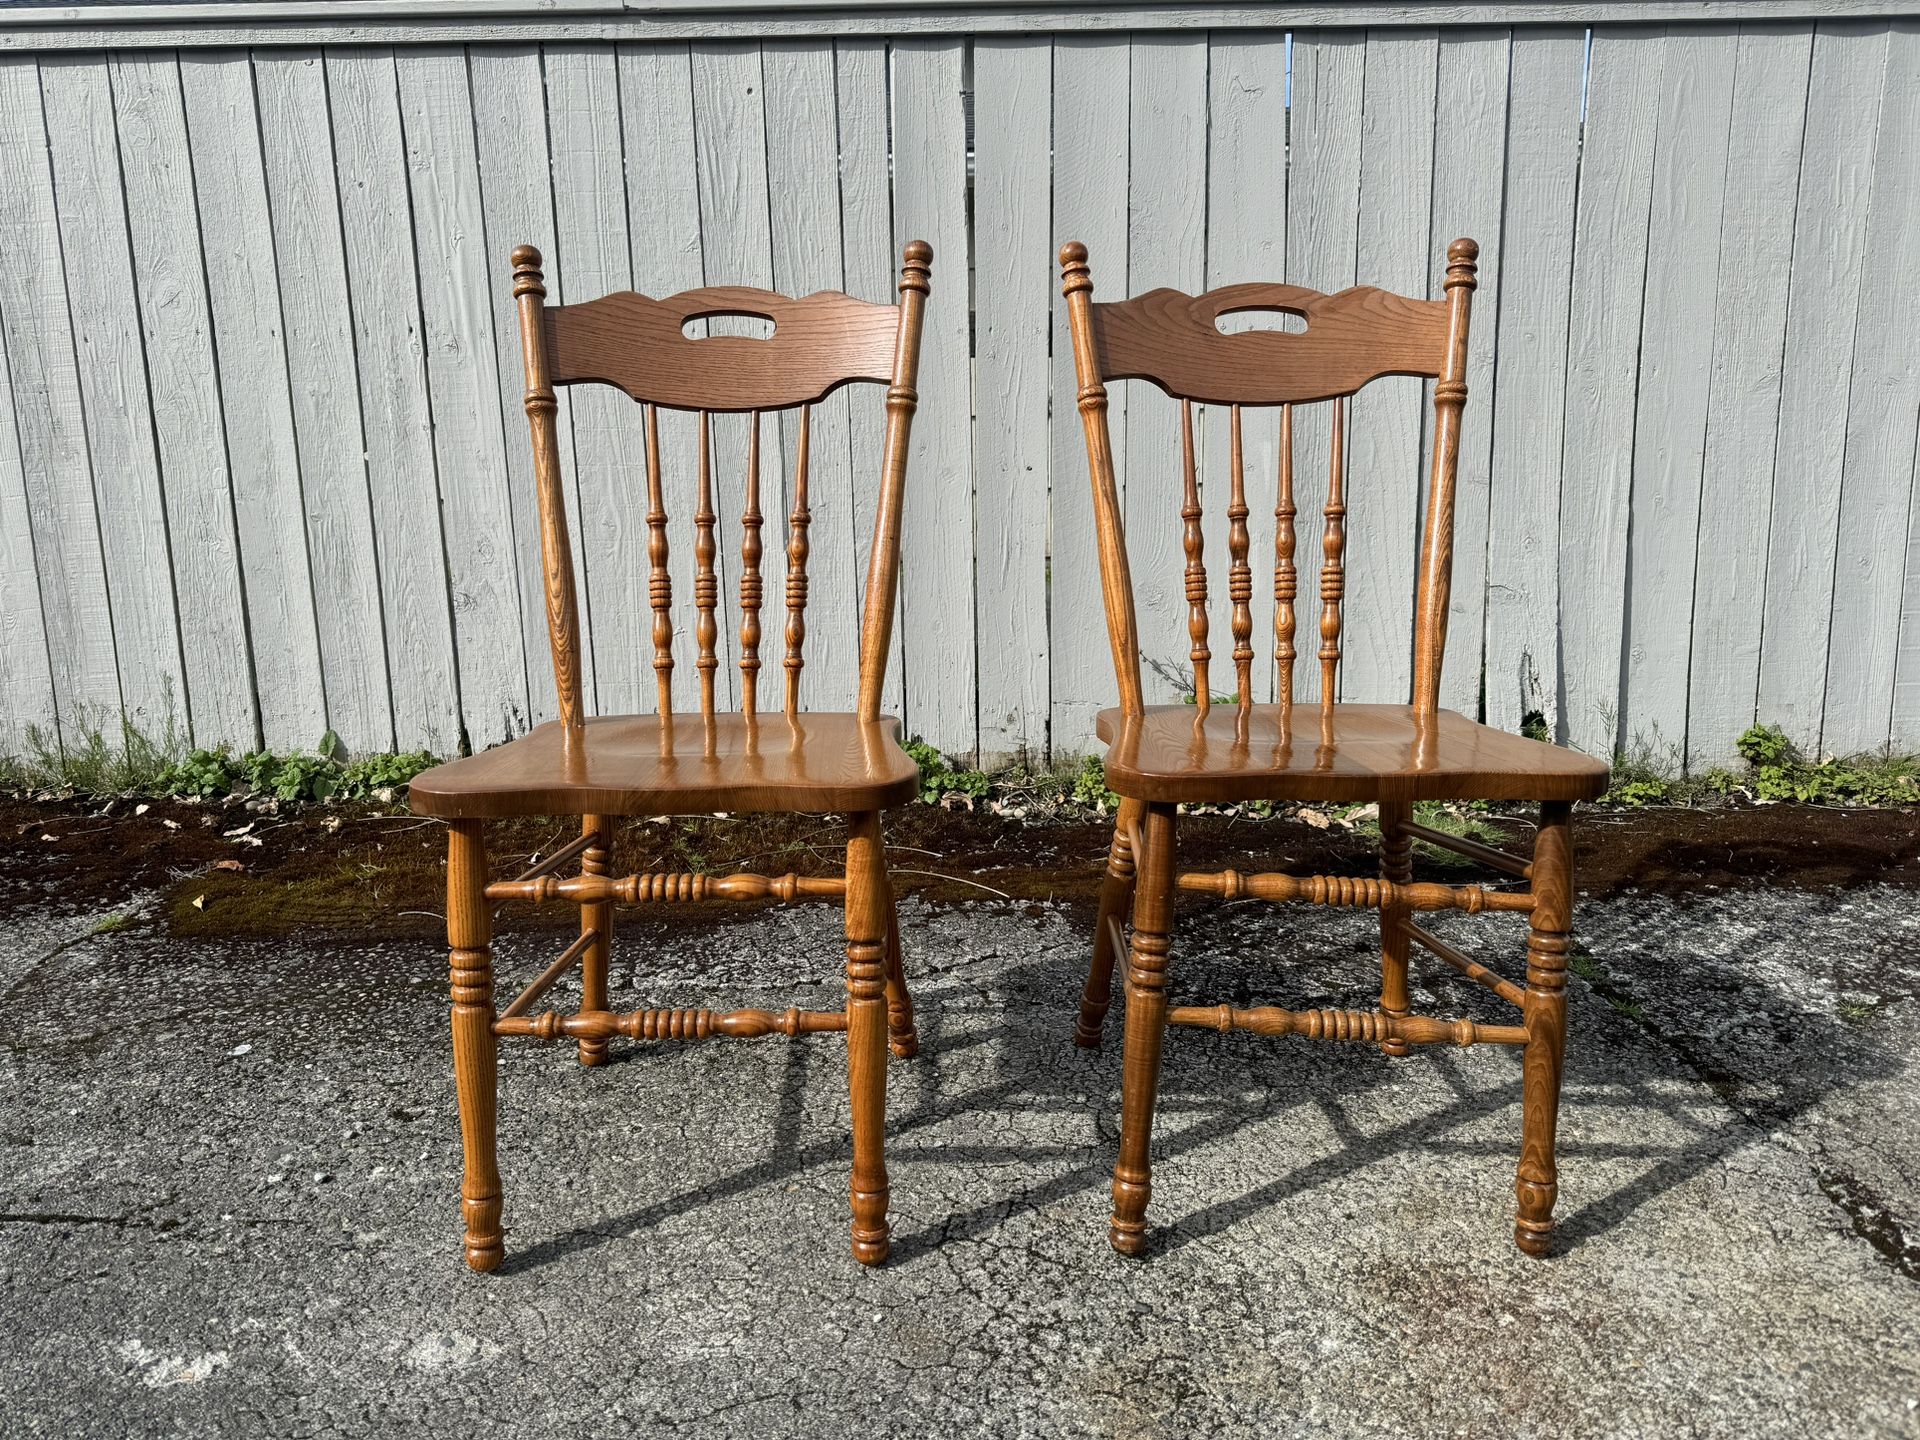 Antique Oak Wood Chairs (Made In Yugoslavia)